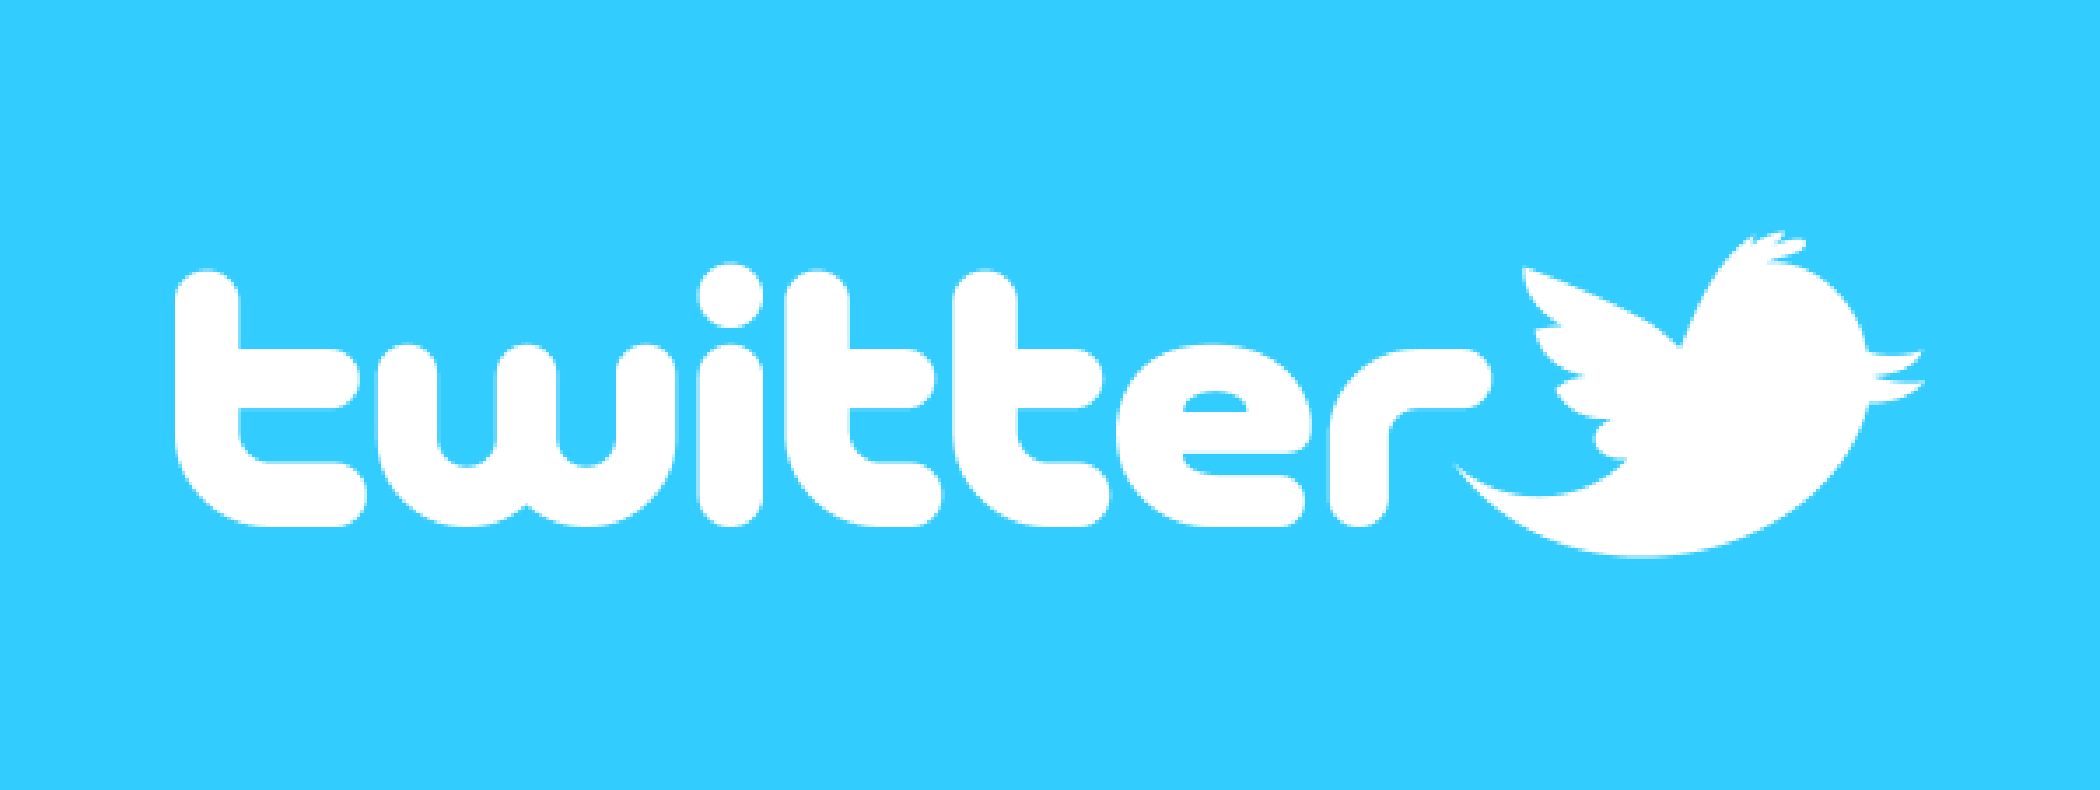 Twitter now lets anyone request a verified account